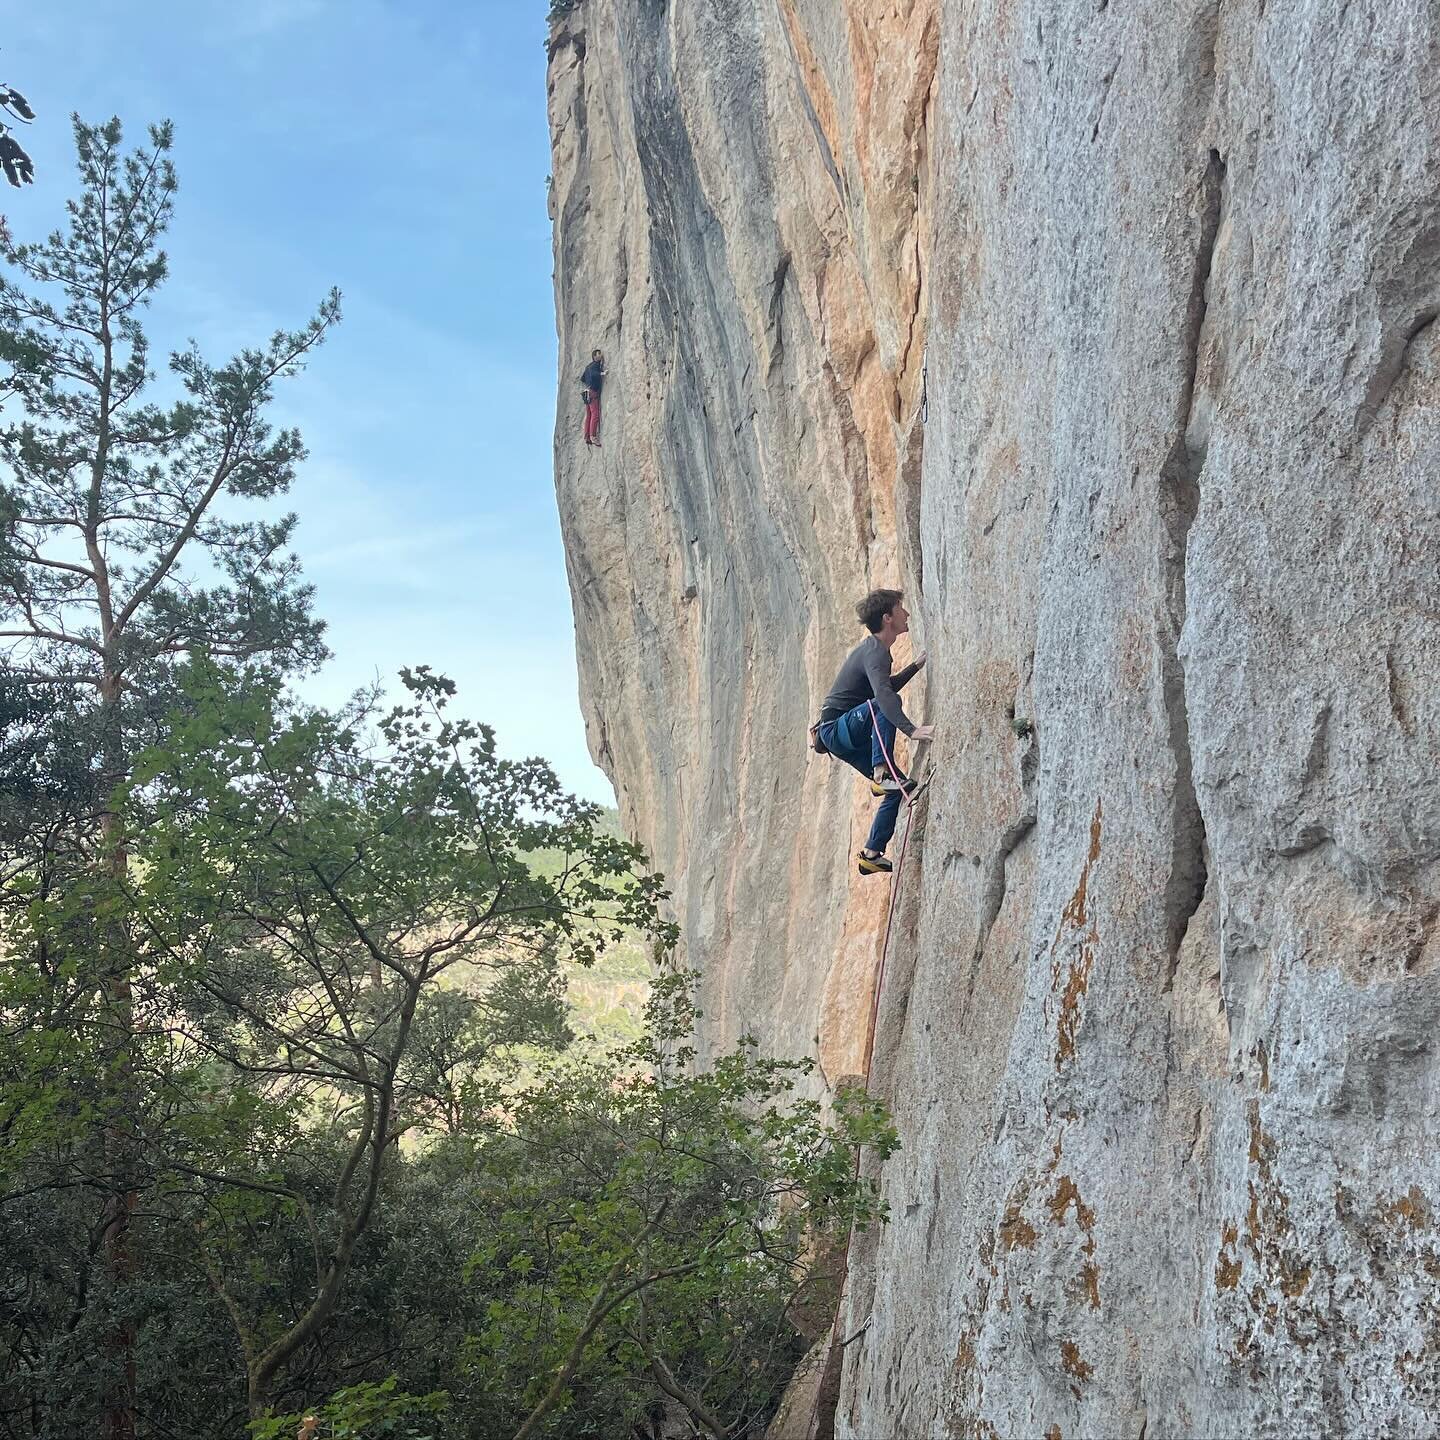 Had a couple of great mornings at L&rsquo;Obaga del Falc&oacute; this week with Dimi &amp; @actuallyyun &amp; the Cornudella crew! Yesterday I did two really nice routes I didn&rsquo;t know about before:
✅ Variant Gioconda (8a)
✅ Zeitgeist (8a)

The 